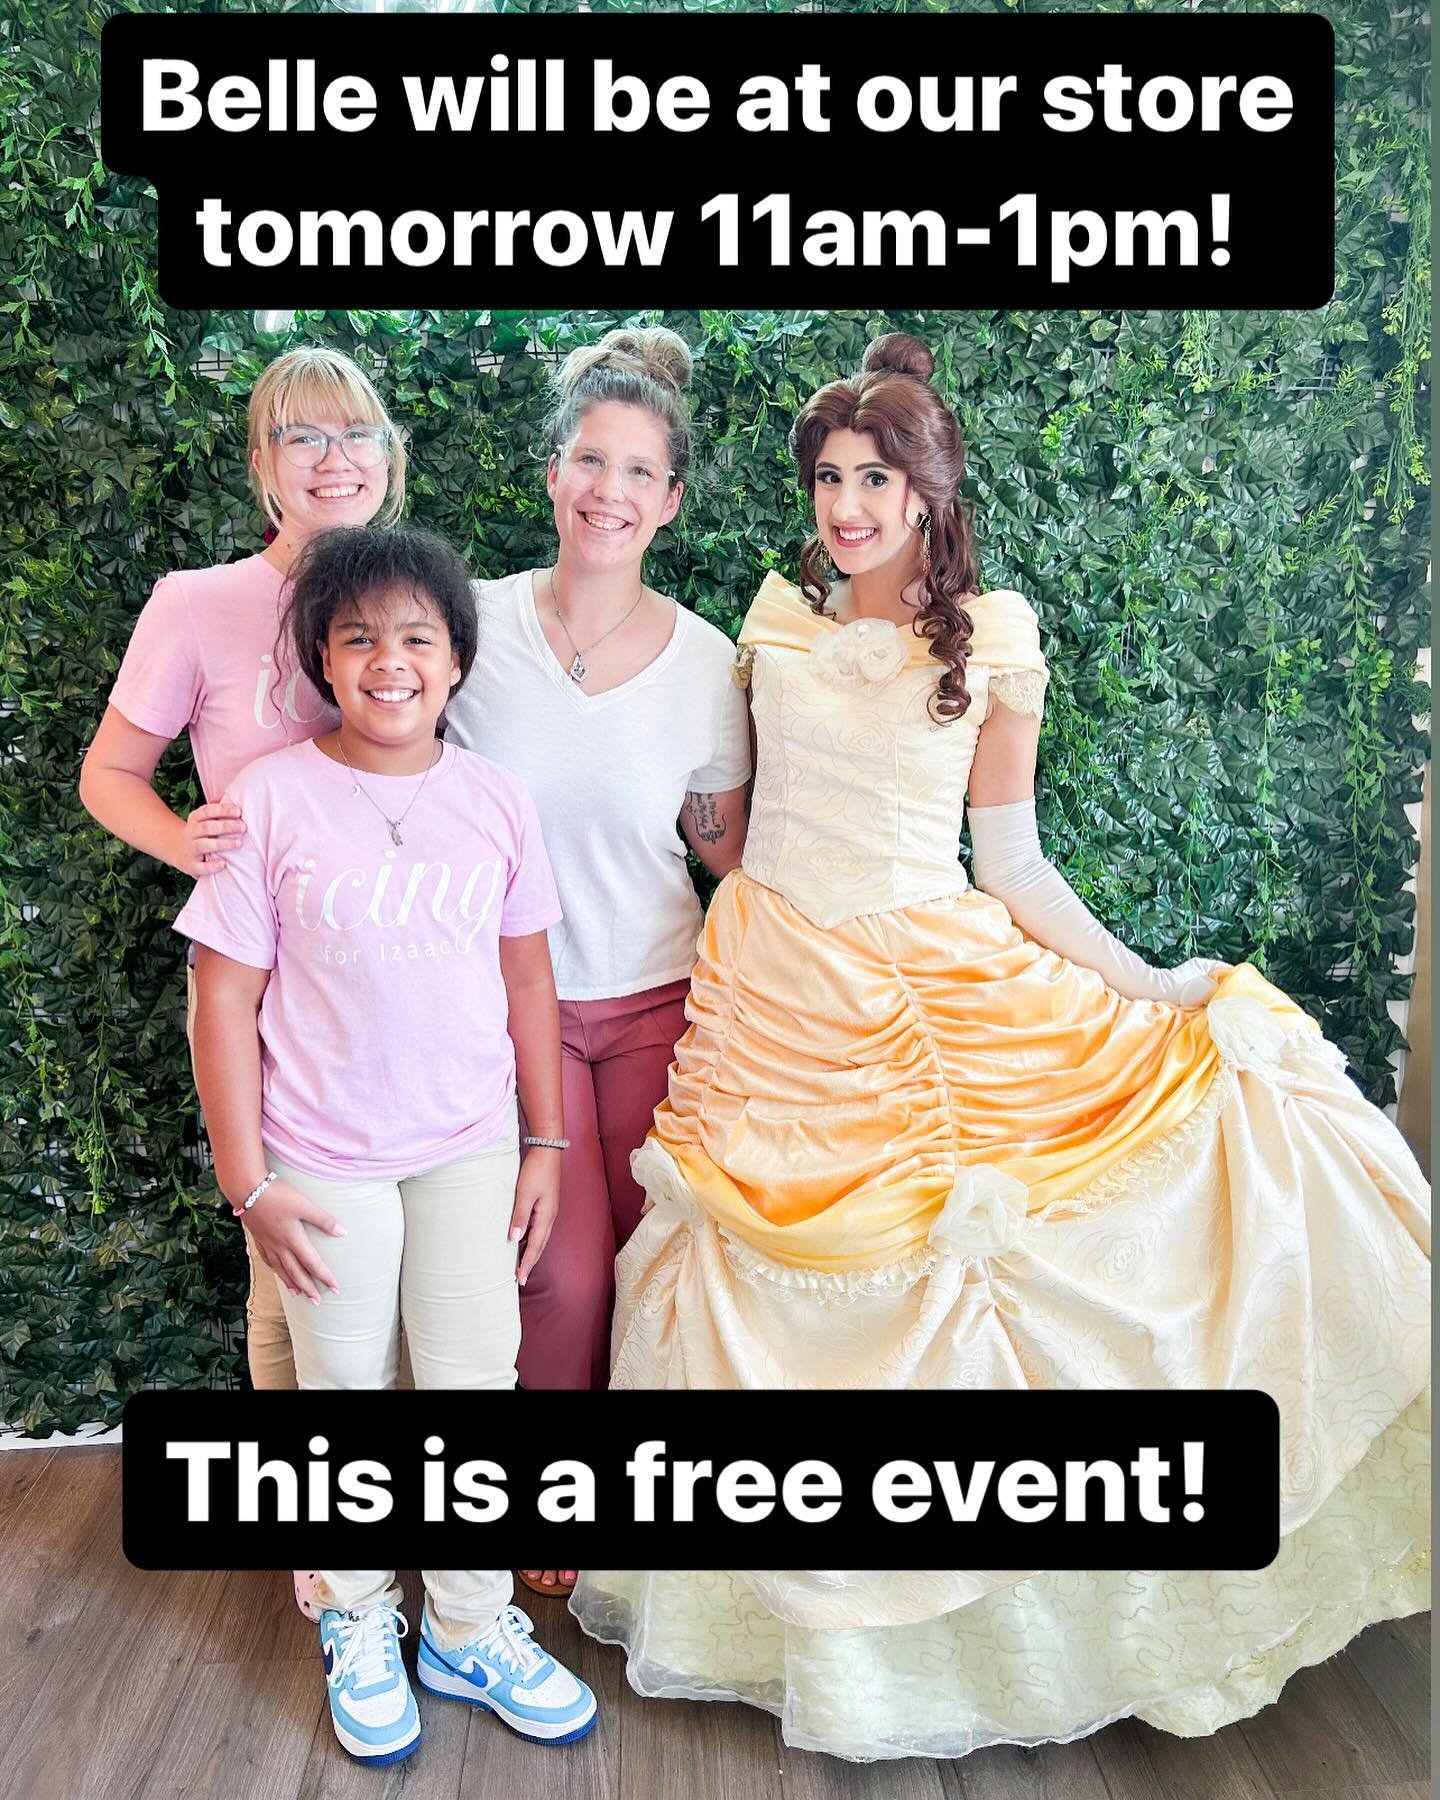 We are preparing for a crowd but nothing like the Elsa day! 🤣 I think half the city came to see the ice princesses!!! Yall scared me a little bit, but I&rsquo;m always up for a challenge! 

We will have a regular menu all day! Tons of cheesecake, co